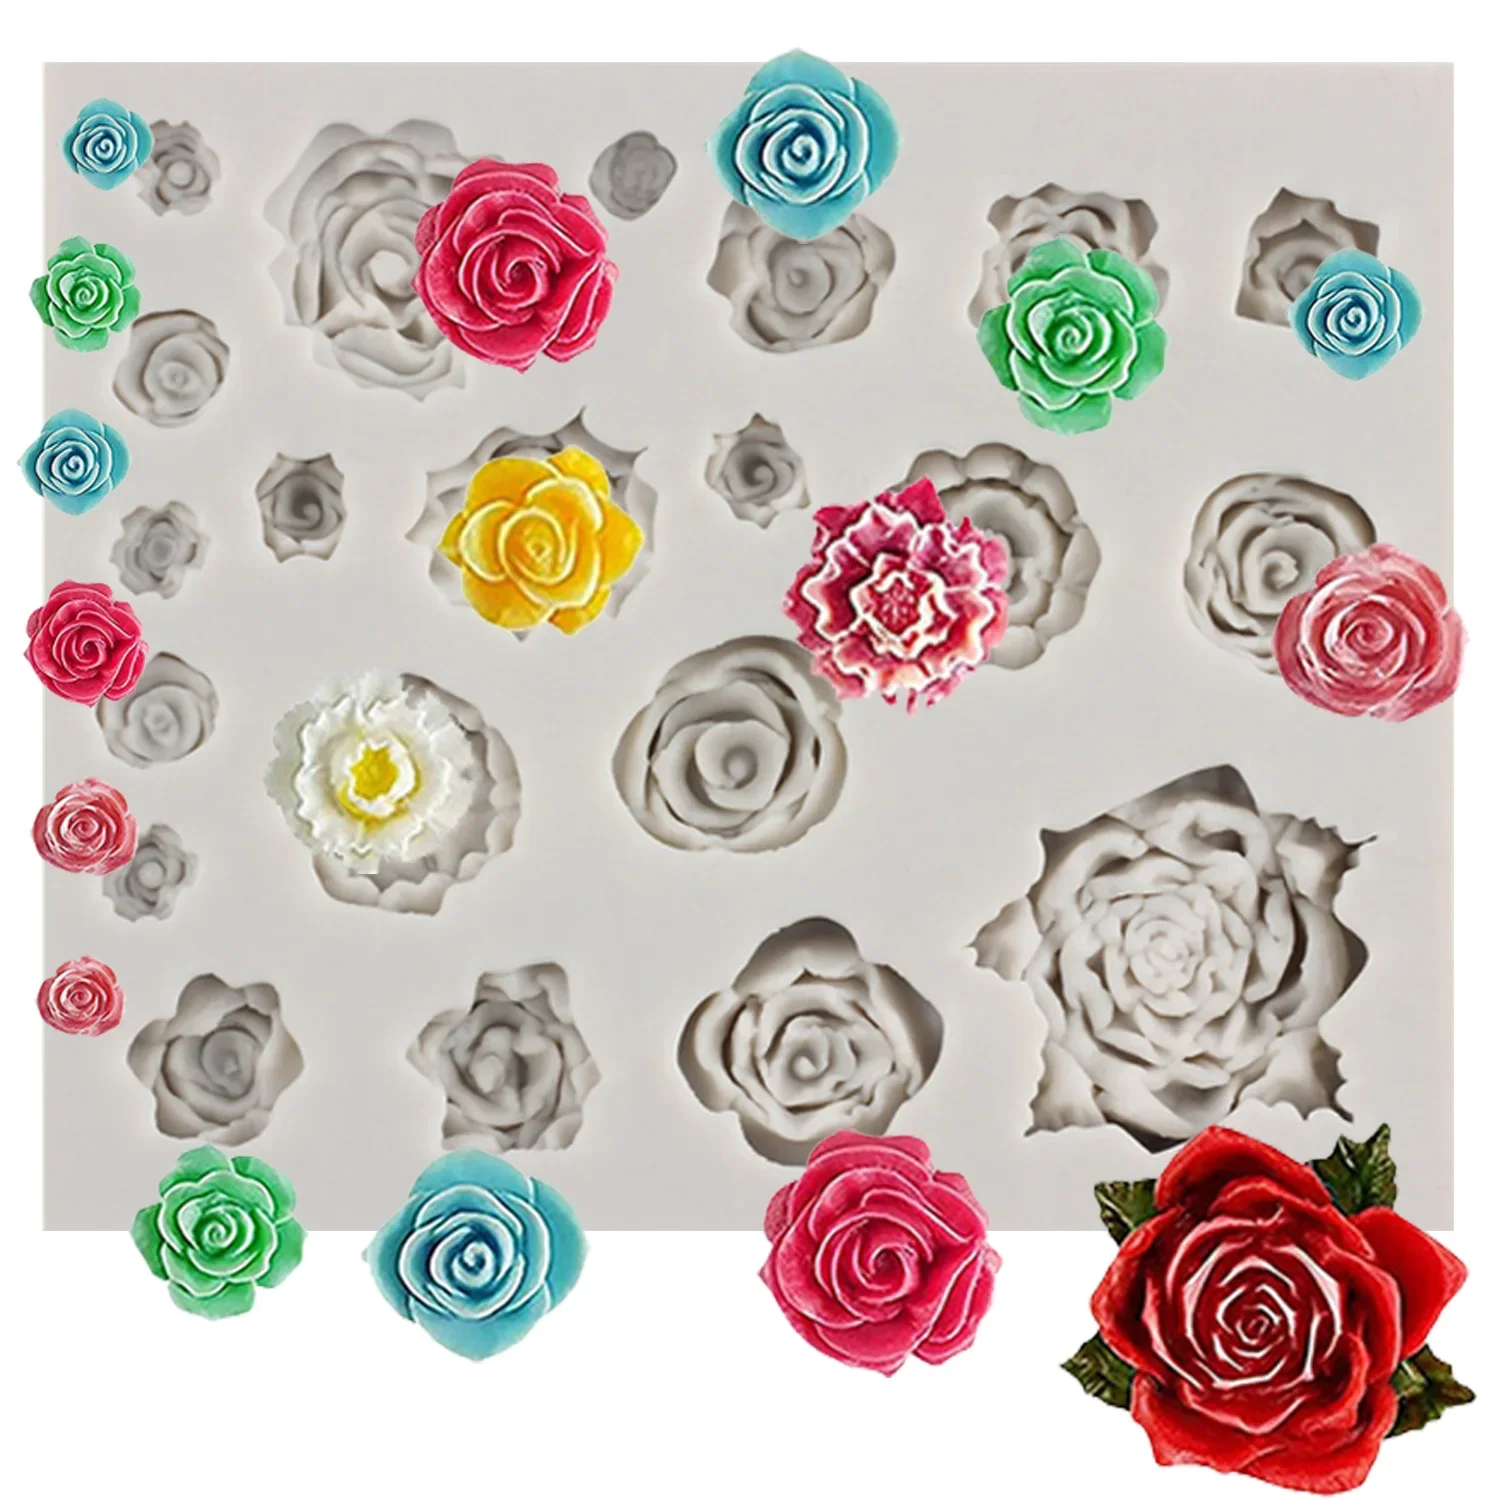 

Roses Flower Fondant Candy Silicone Mold Sugarcraft Cake Decoration Tool Cupcake Topper Polymer Clay Resin Jewelry Casting Molds